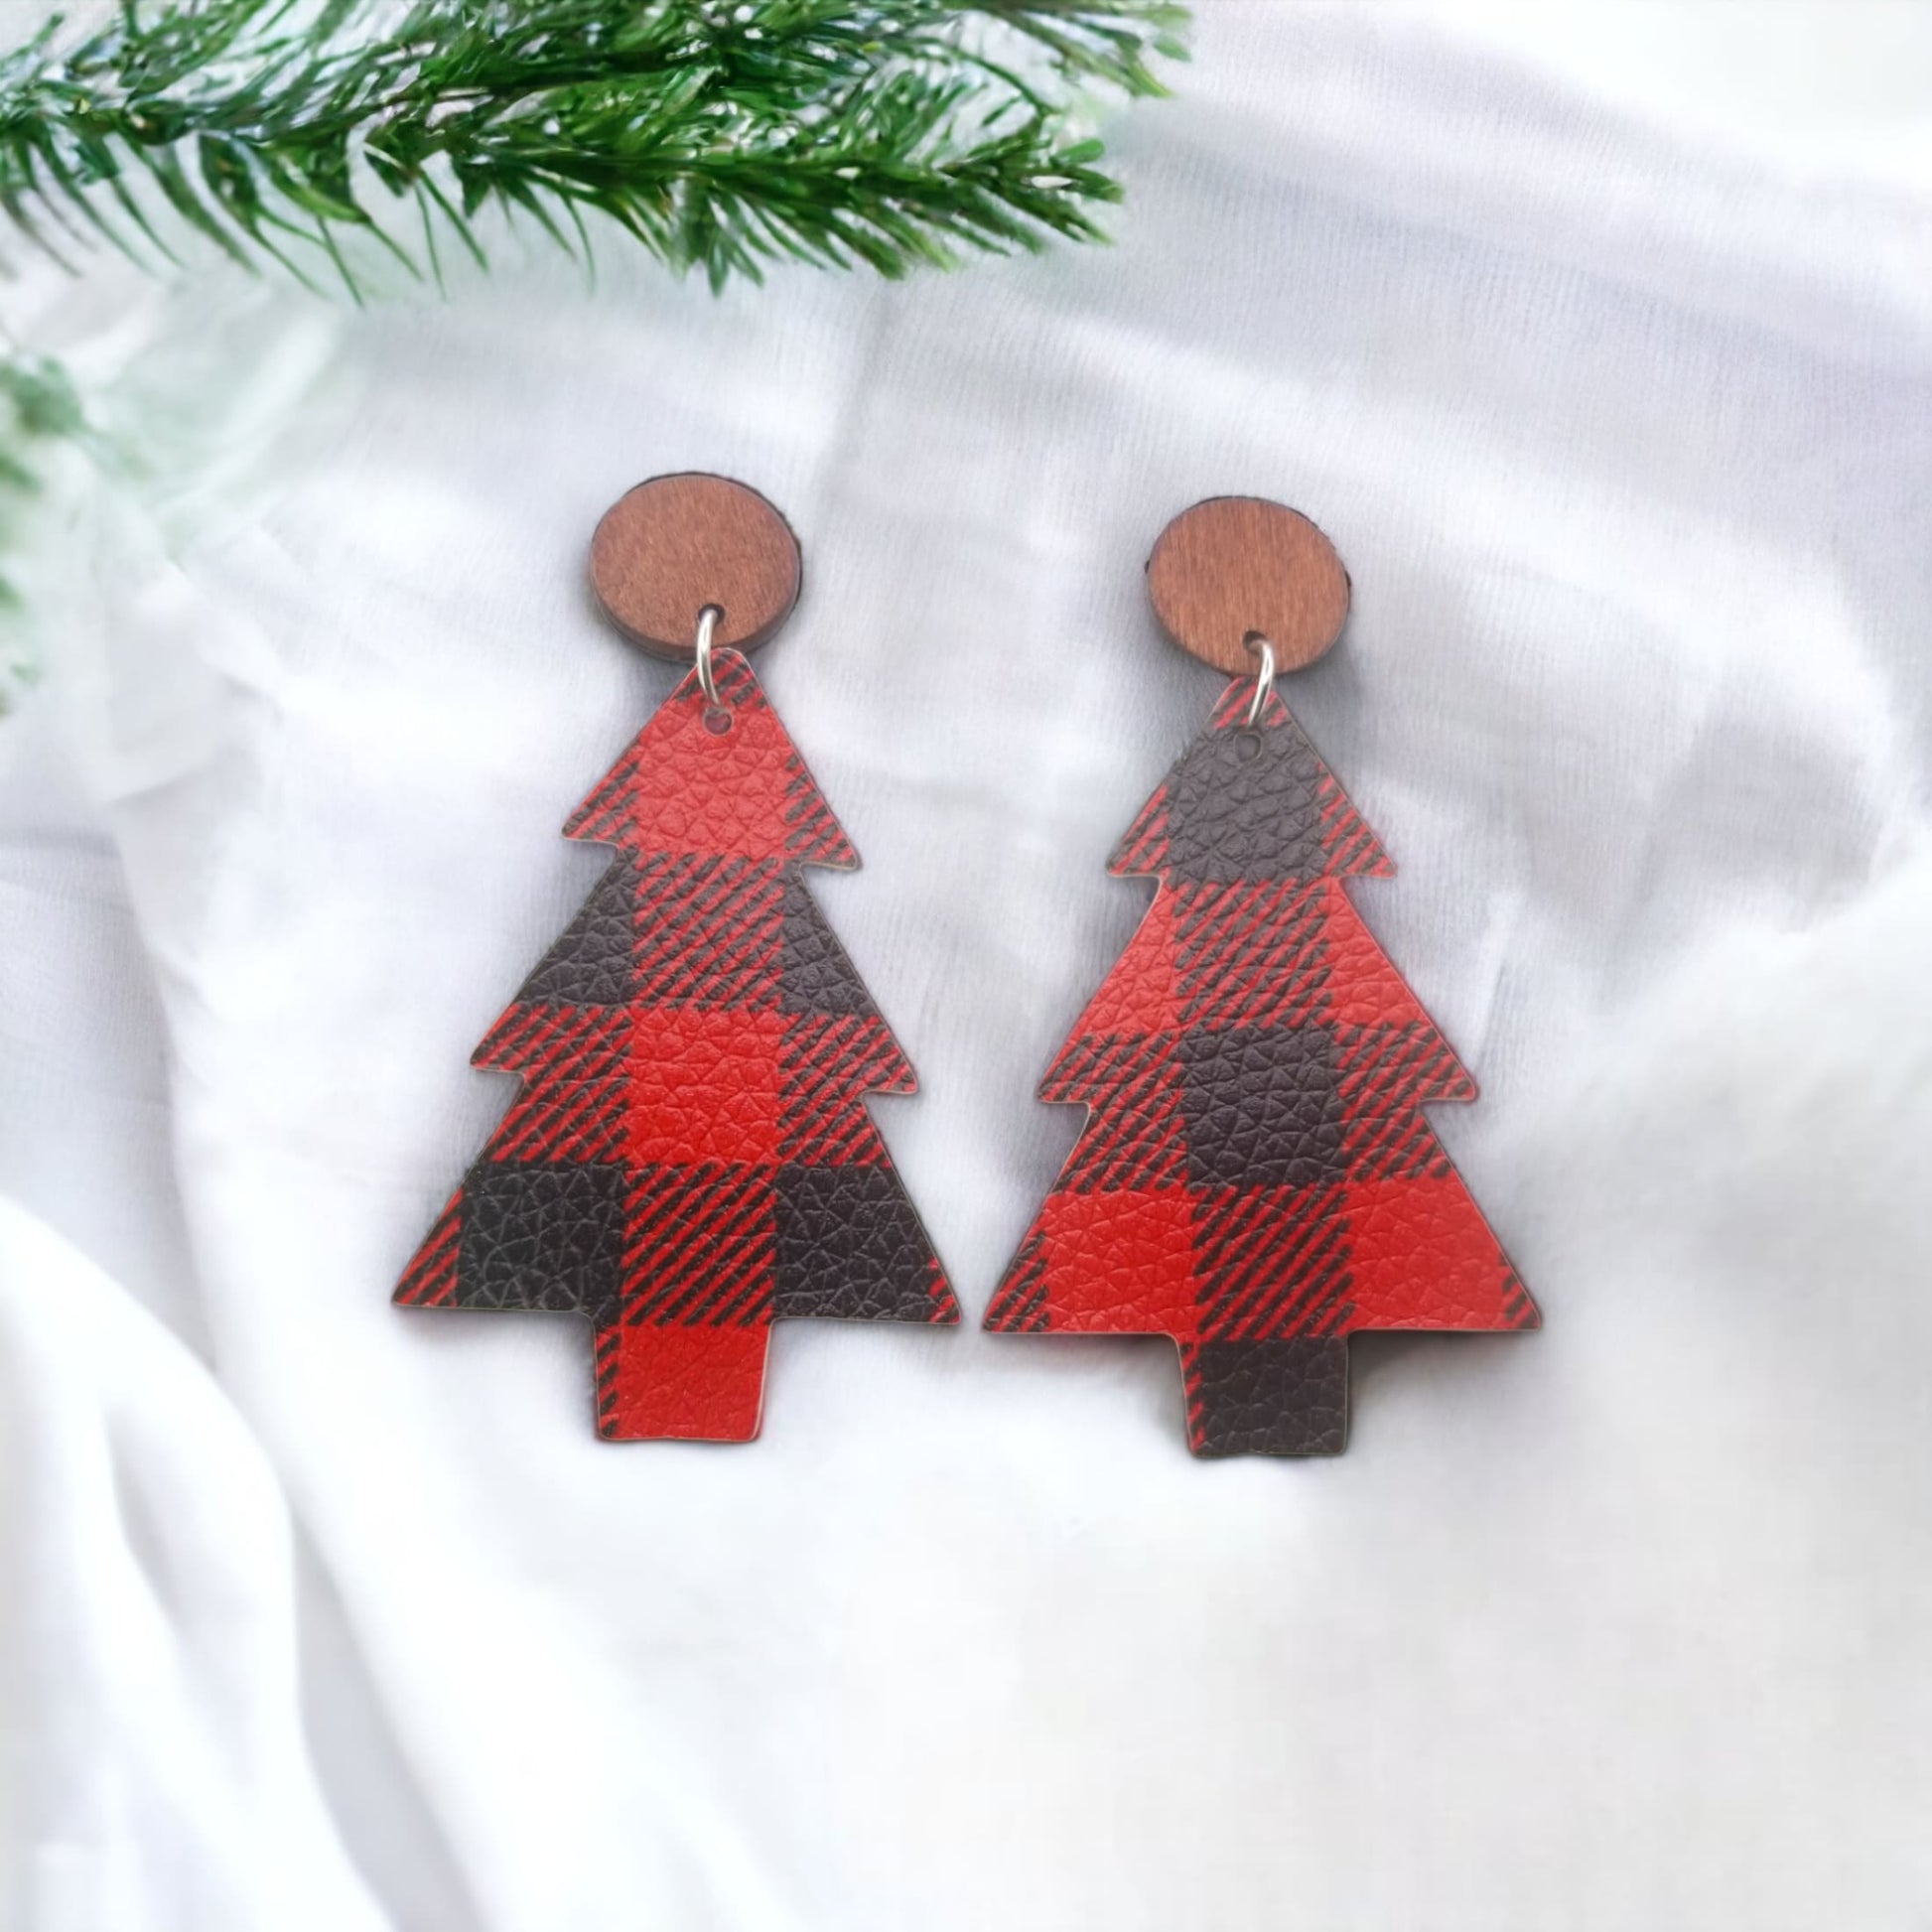 Buffalo Plaid Tree Earrings from Confetti Kitty, Only 7.99